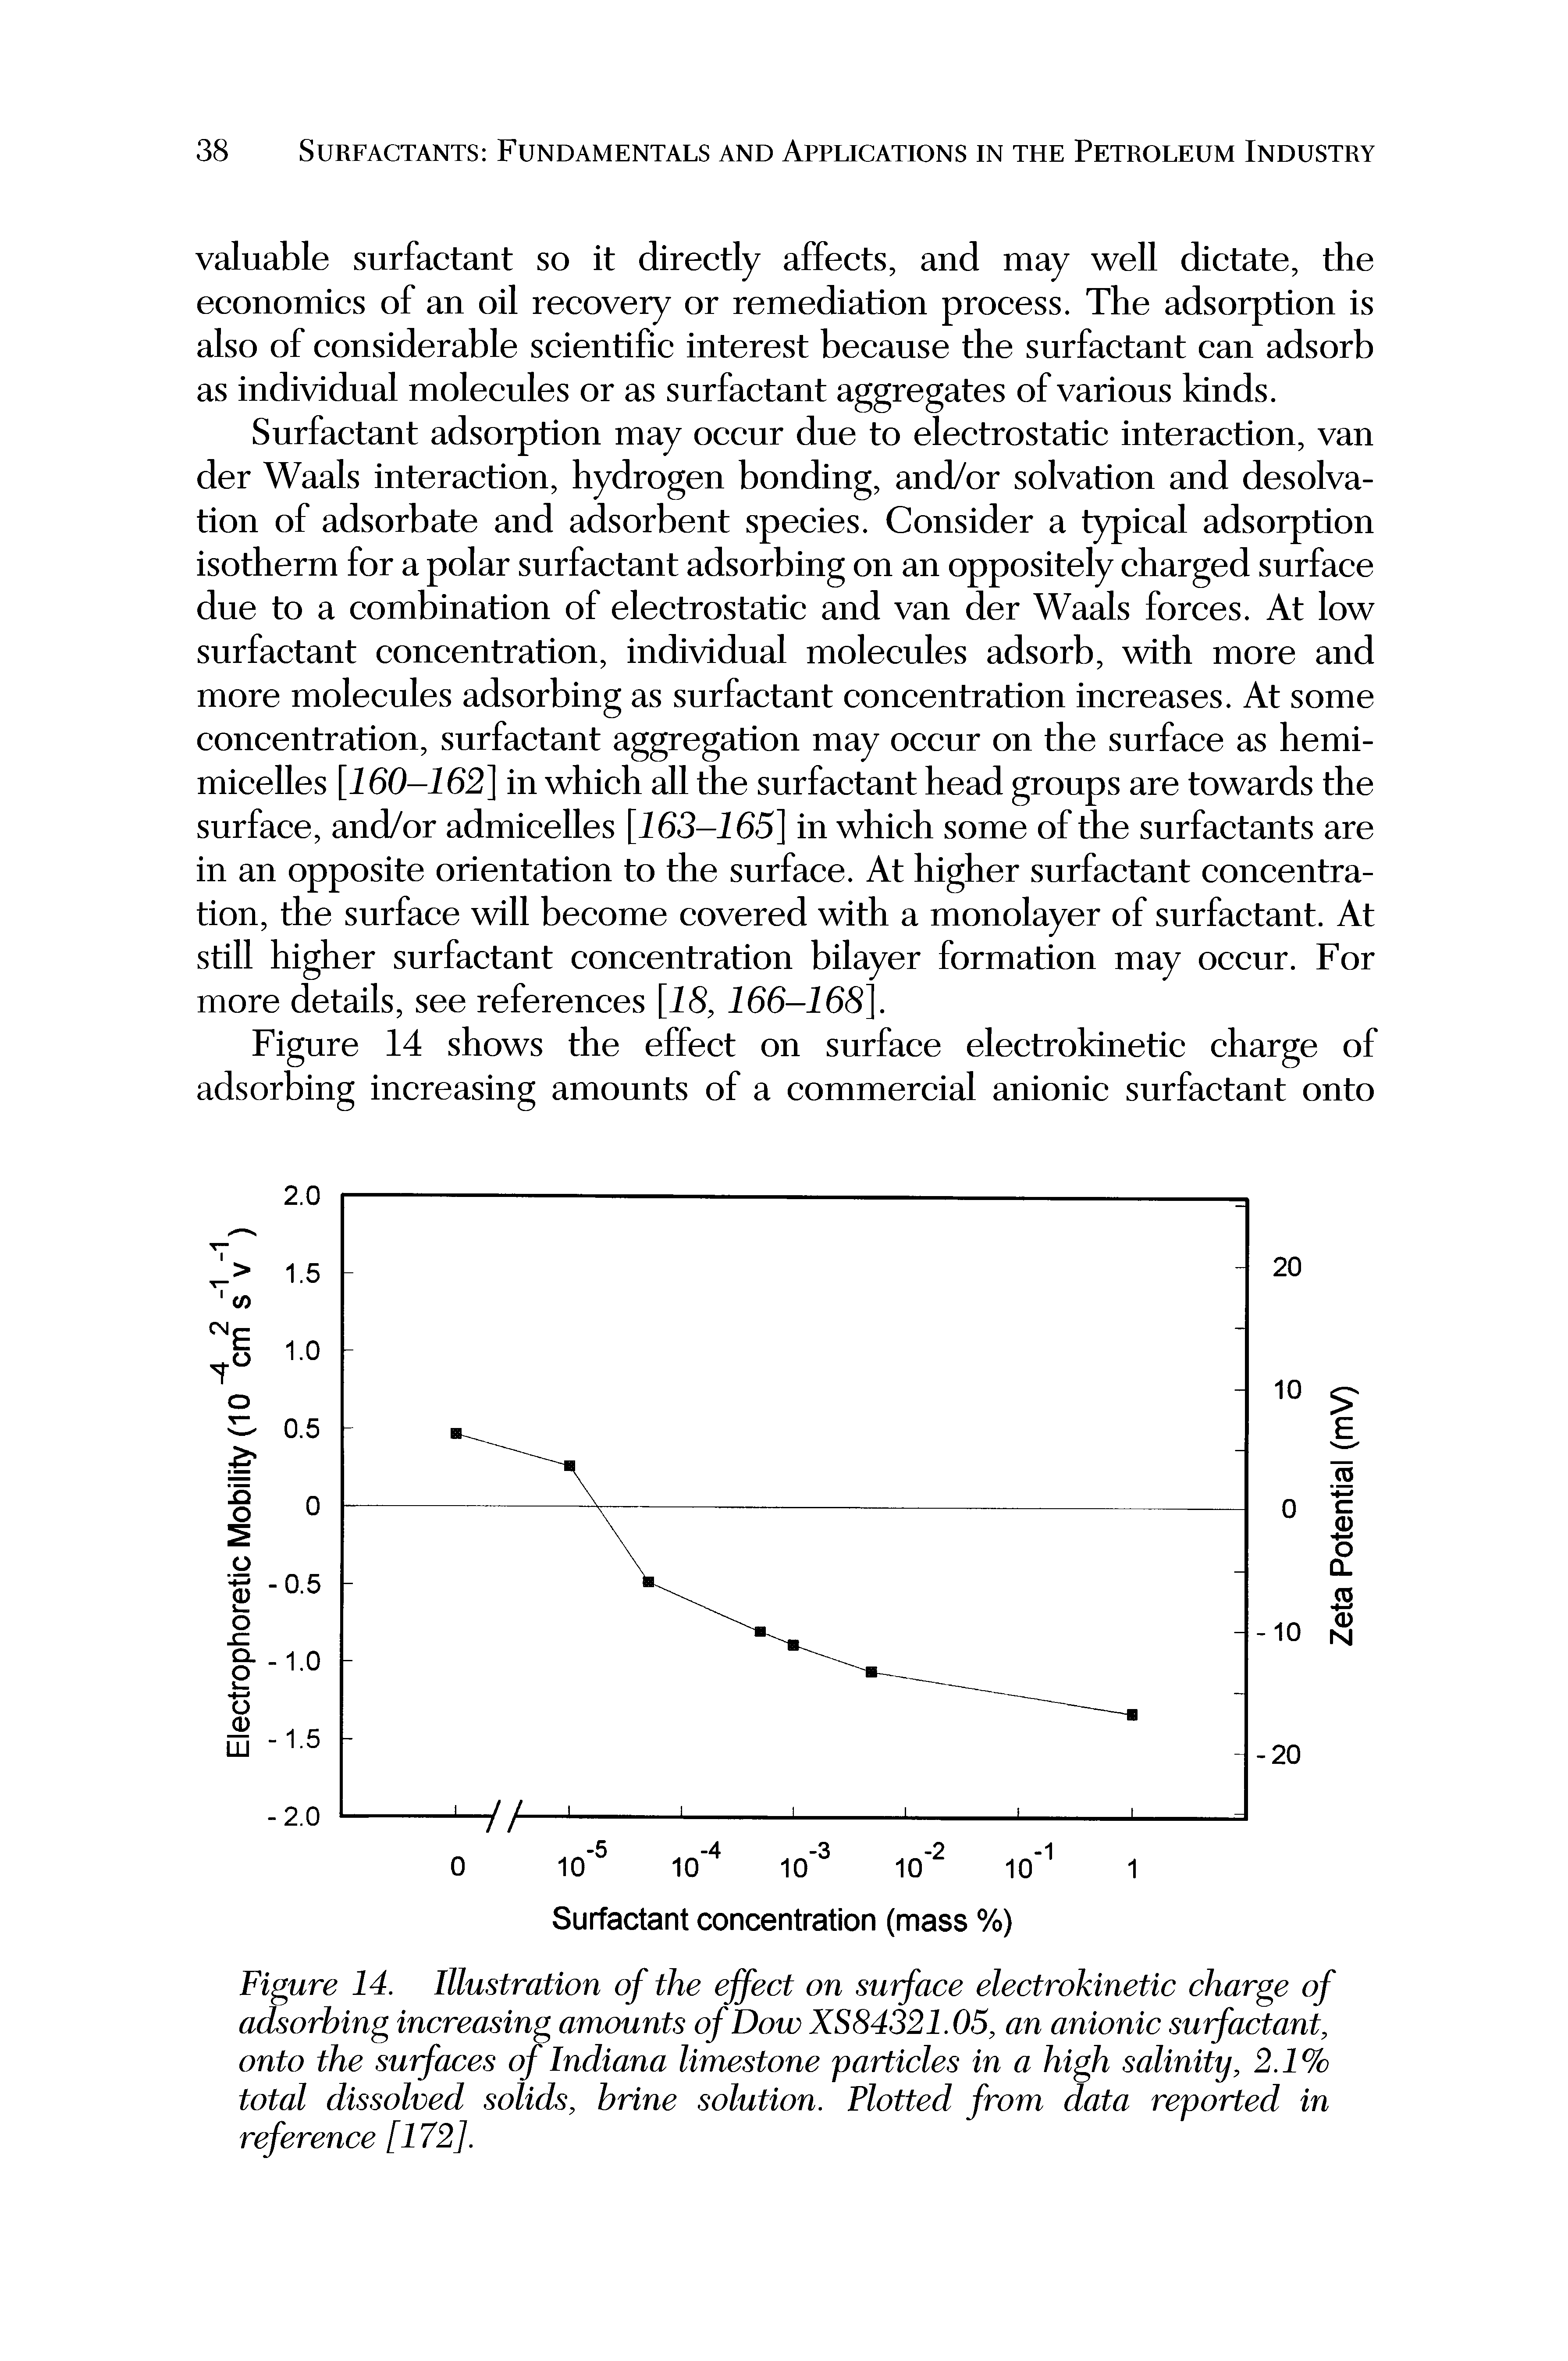 Figure 14. Illustration of the effect on surface electrokinetic charge of adsorbing increasing amounts of Dow XS84321.05, an anionic surfactant, onto the surfaces of Indiana limestone particles in a high salinity, 2.1% total dissolved solids, brine solution. Plotted from data reported in reference [172].